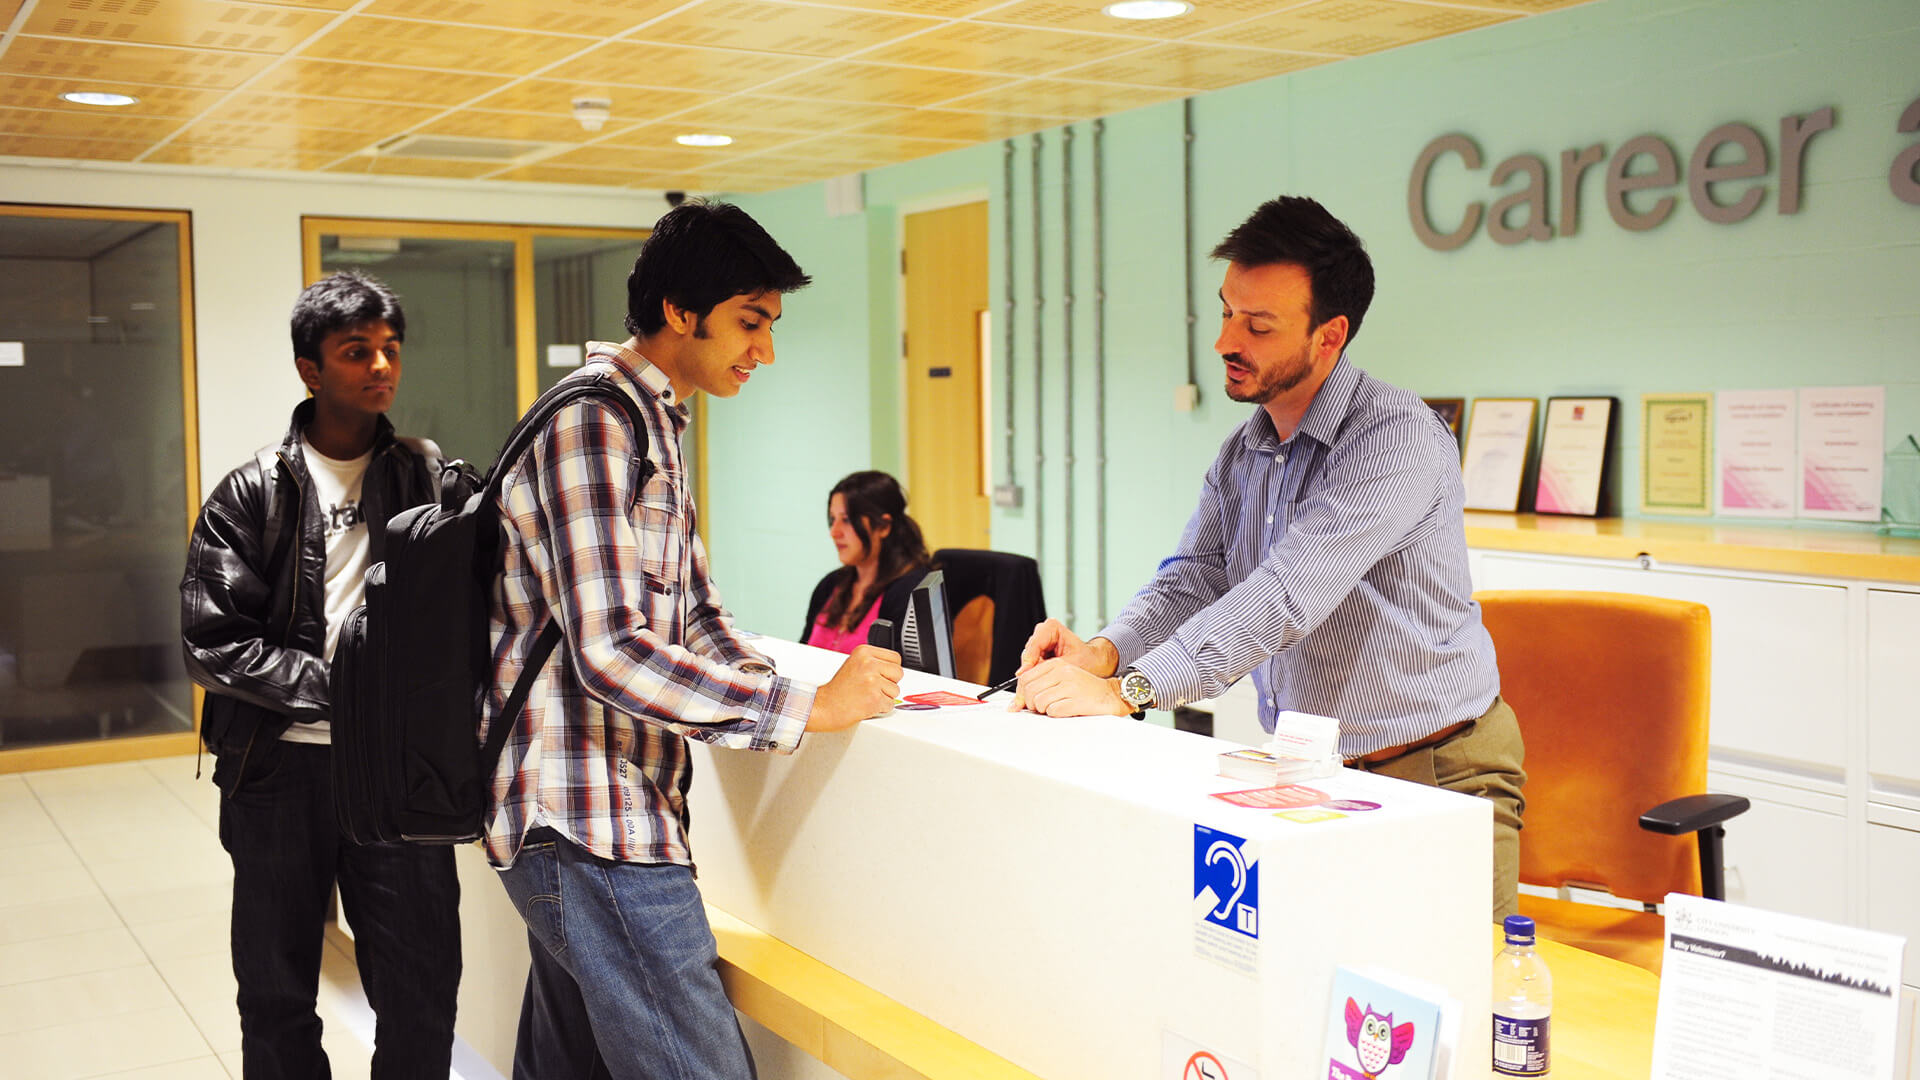 International student talking to a memeber of staff at the Student Hub Careers Service at City, University of London